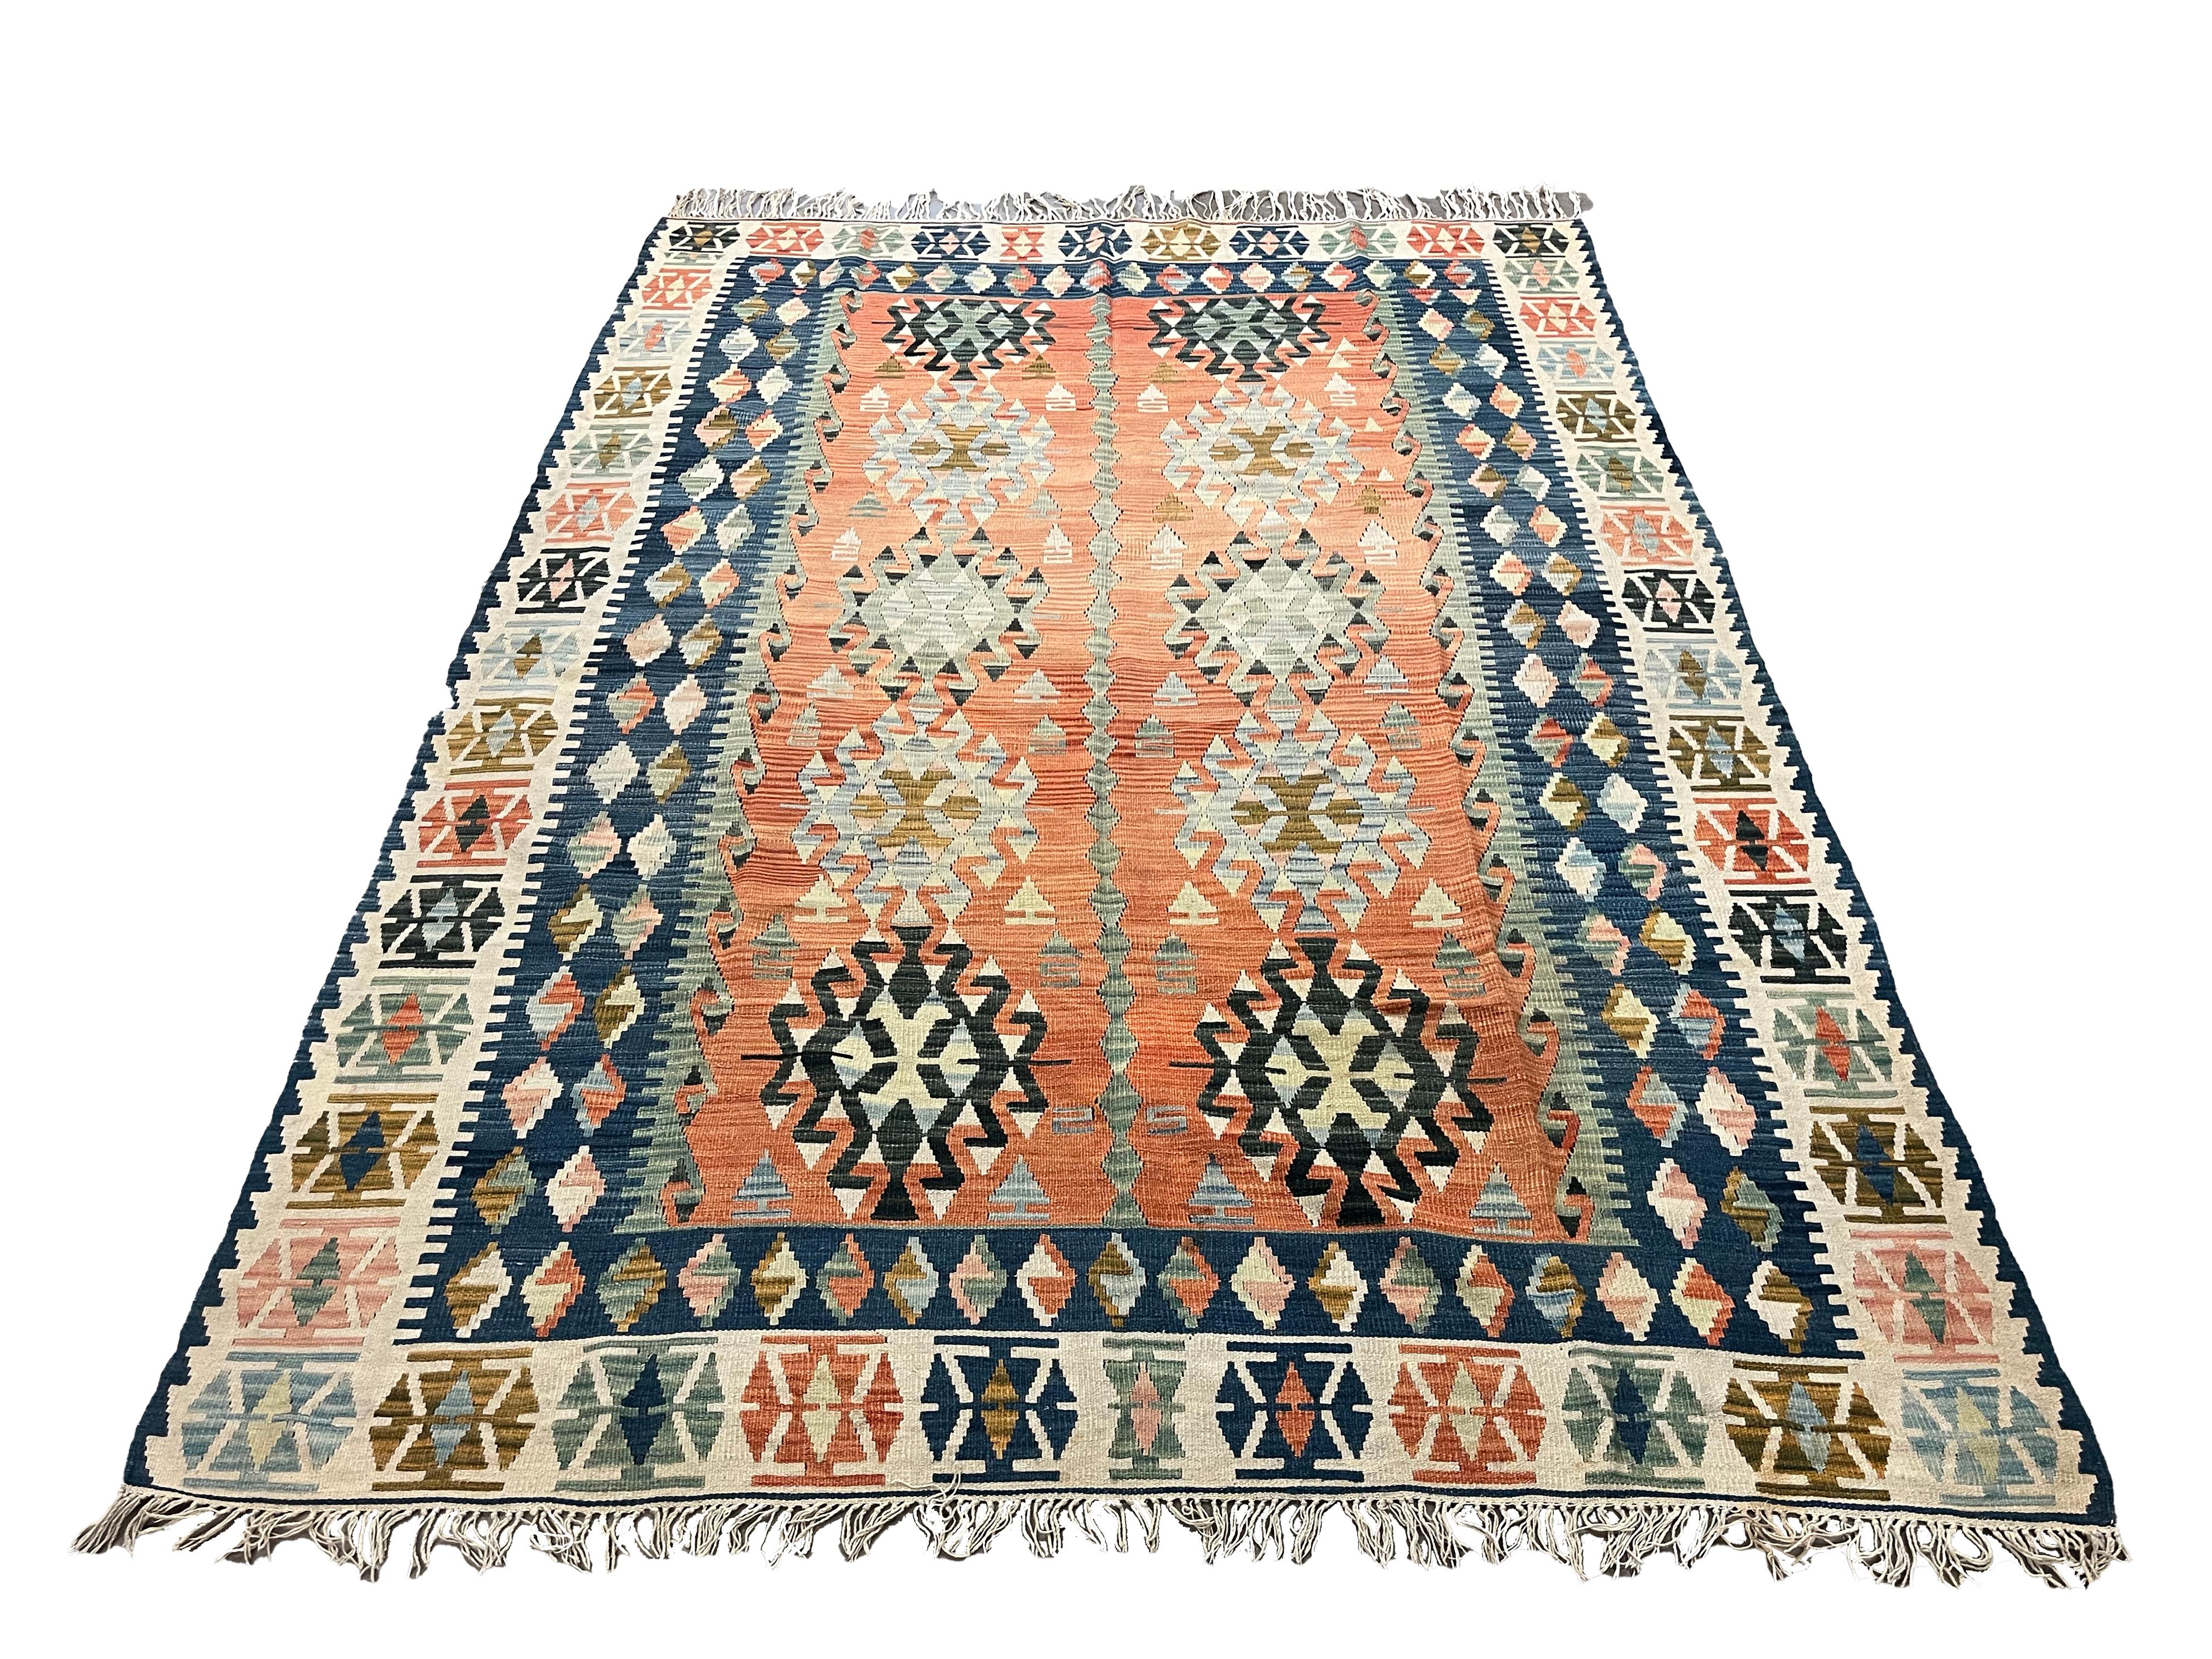 This bold handwoven kilim rug is an excellent example of a flatwoven geometric rug woven in Turkey in the early 20th century, circa 1910. The design features a bold geometric pattern woven in blue, beige, and brown accents on a bold rust background.